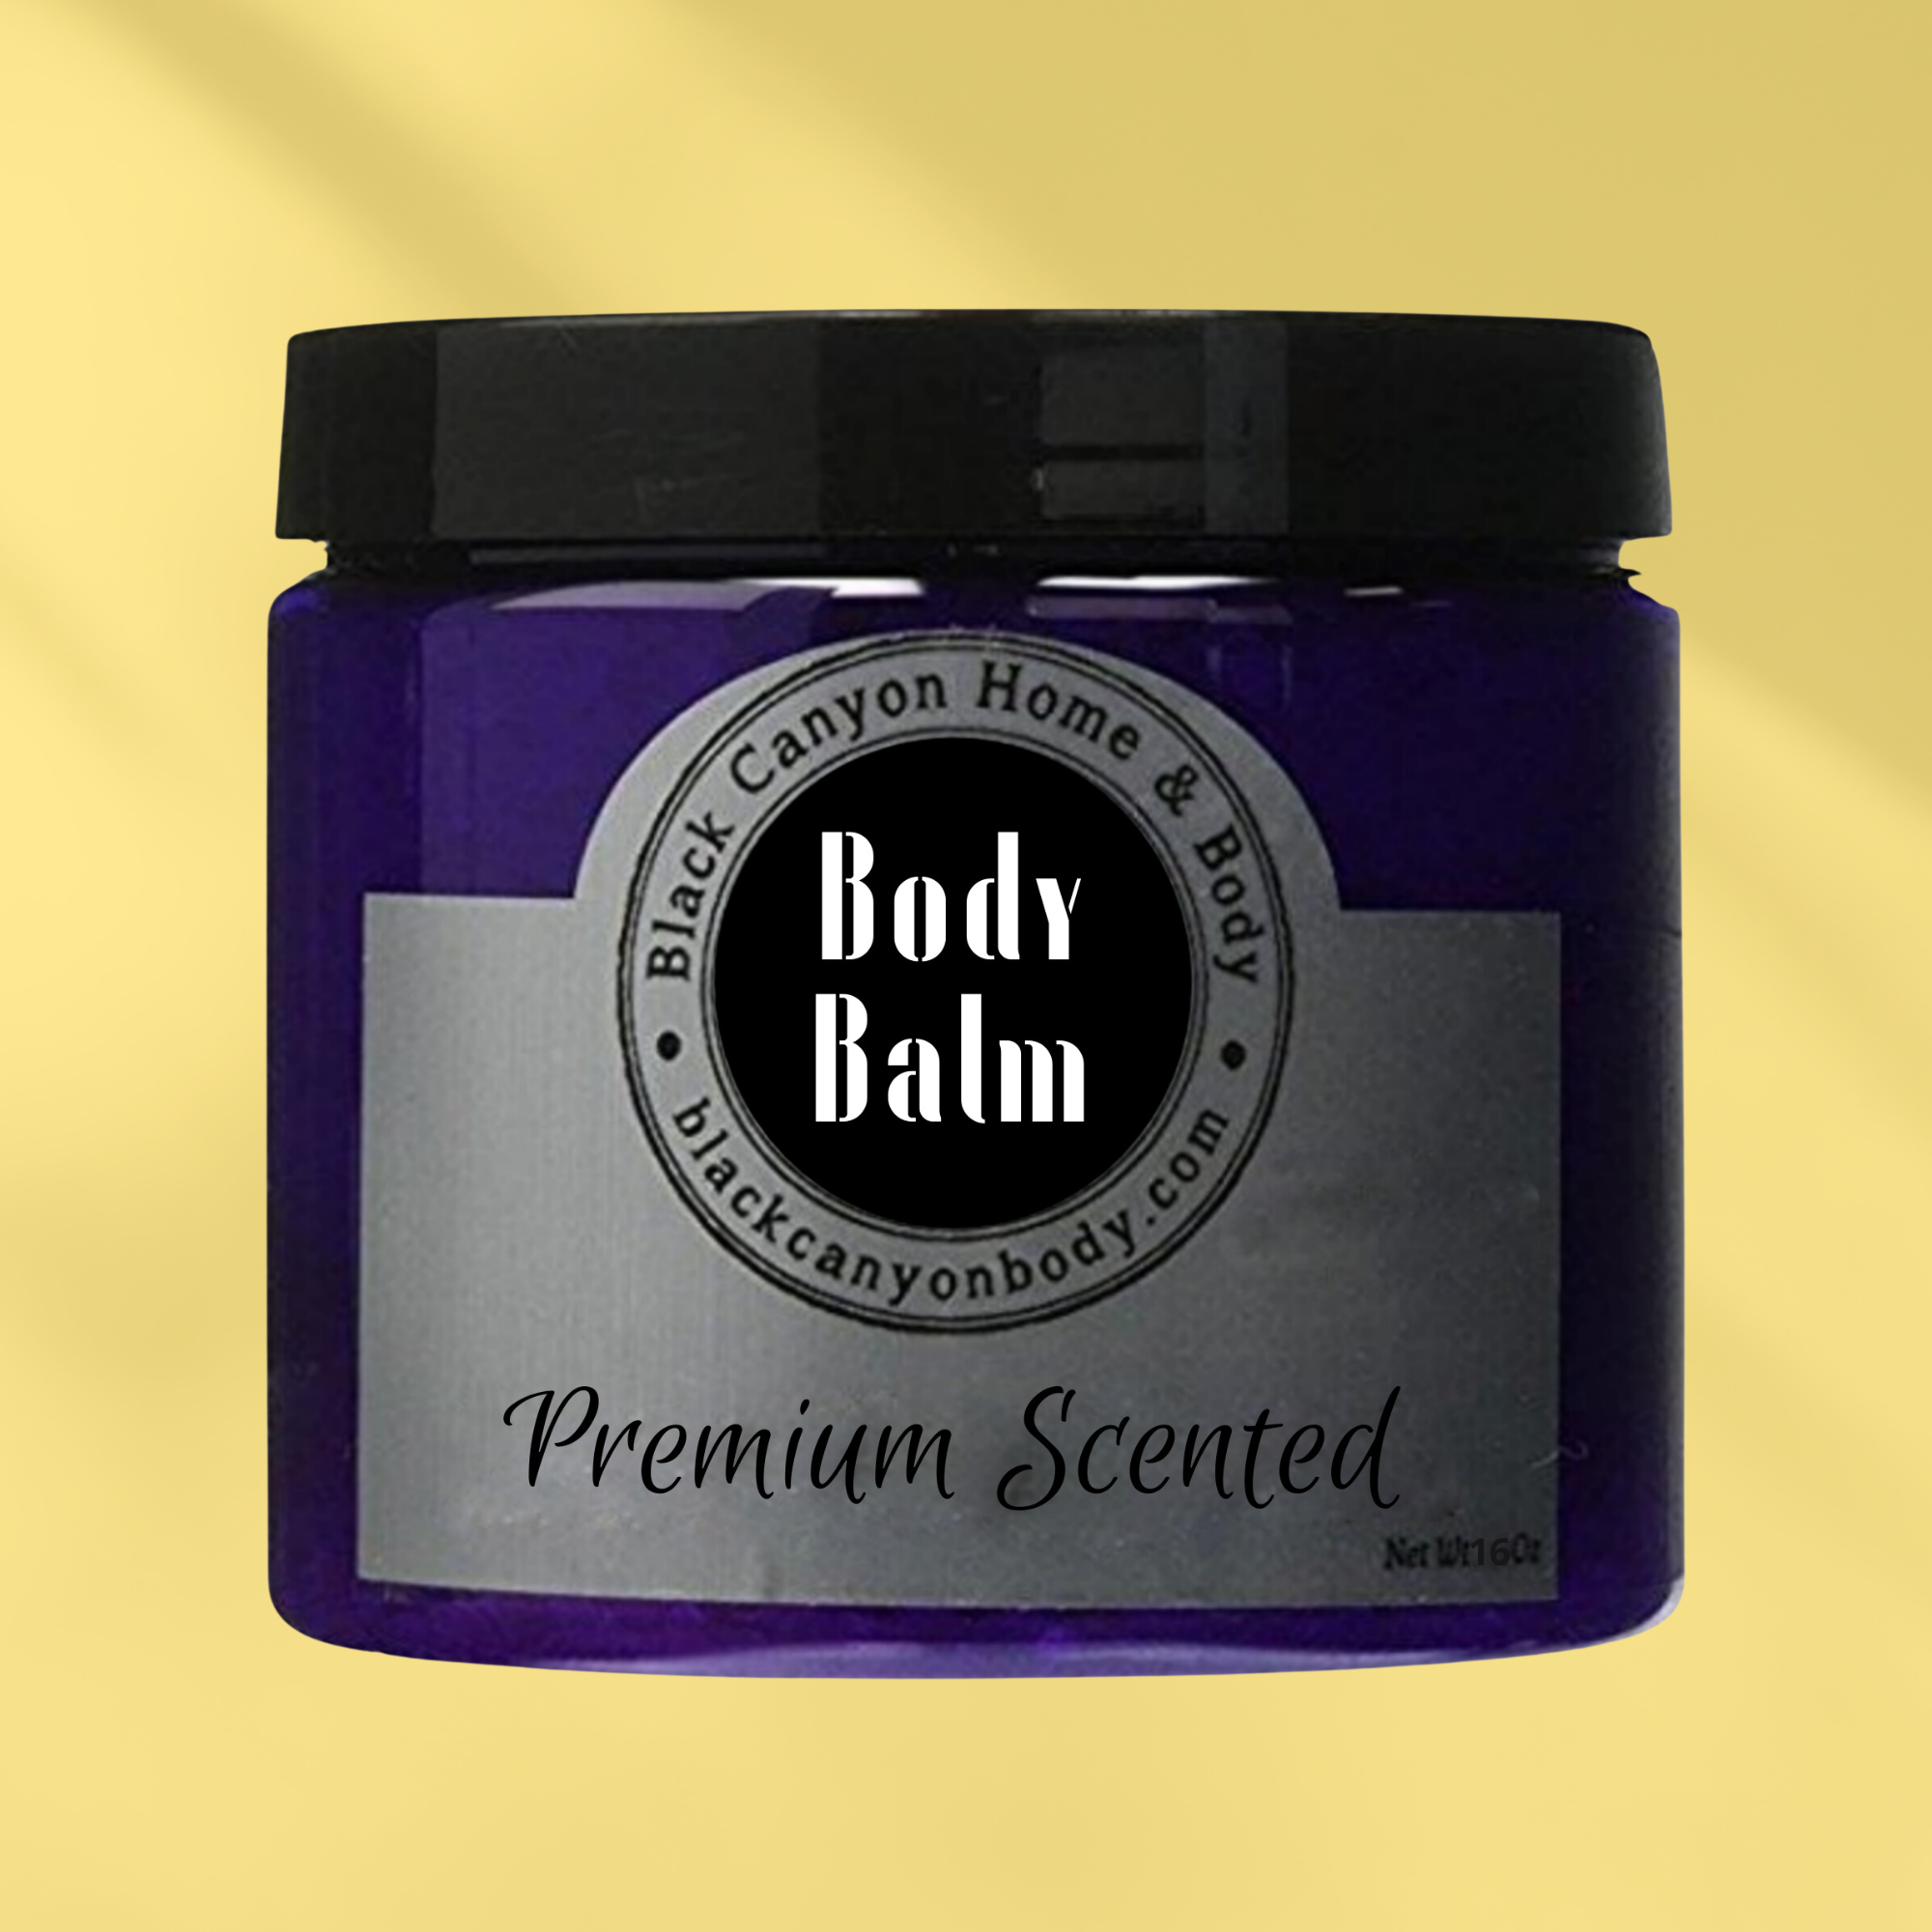 Paydens Cobalt Blue Denim Scented Natural Body Balm with Shea For Men